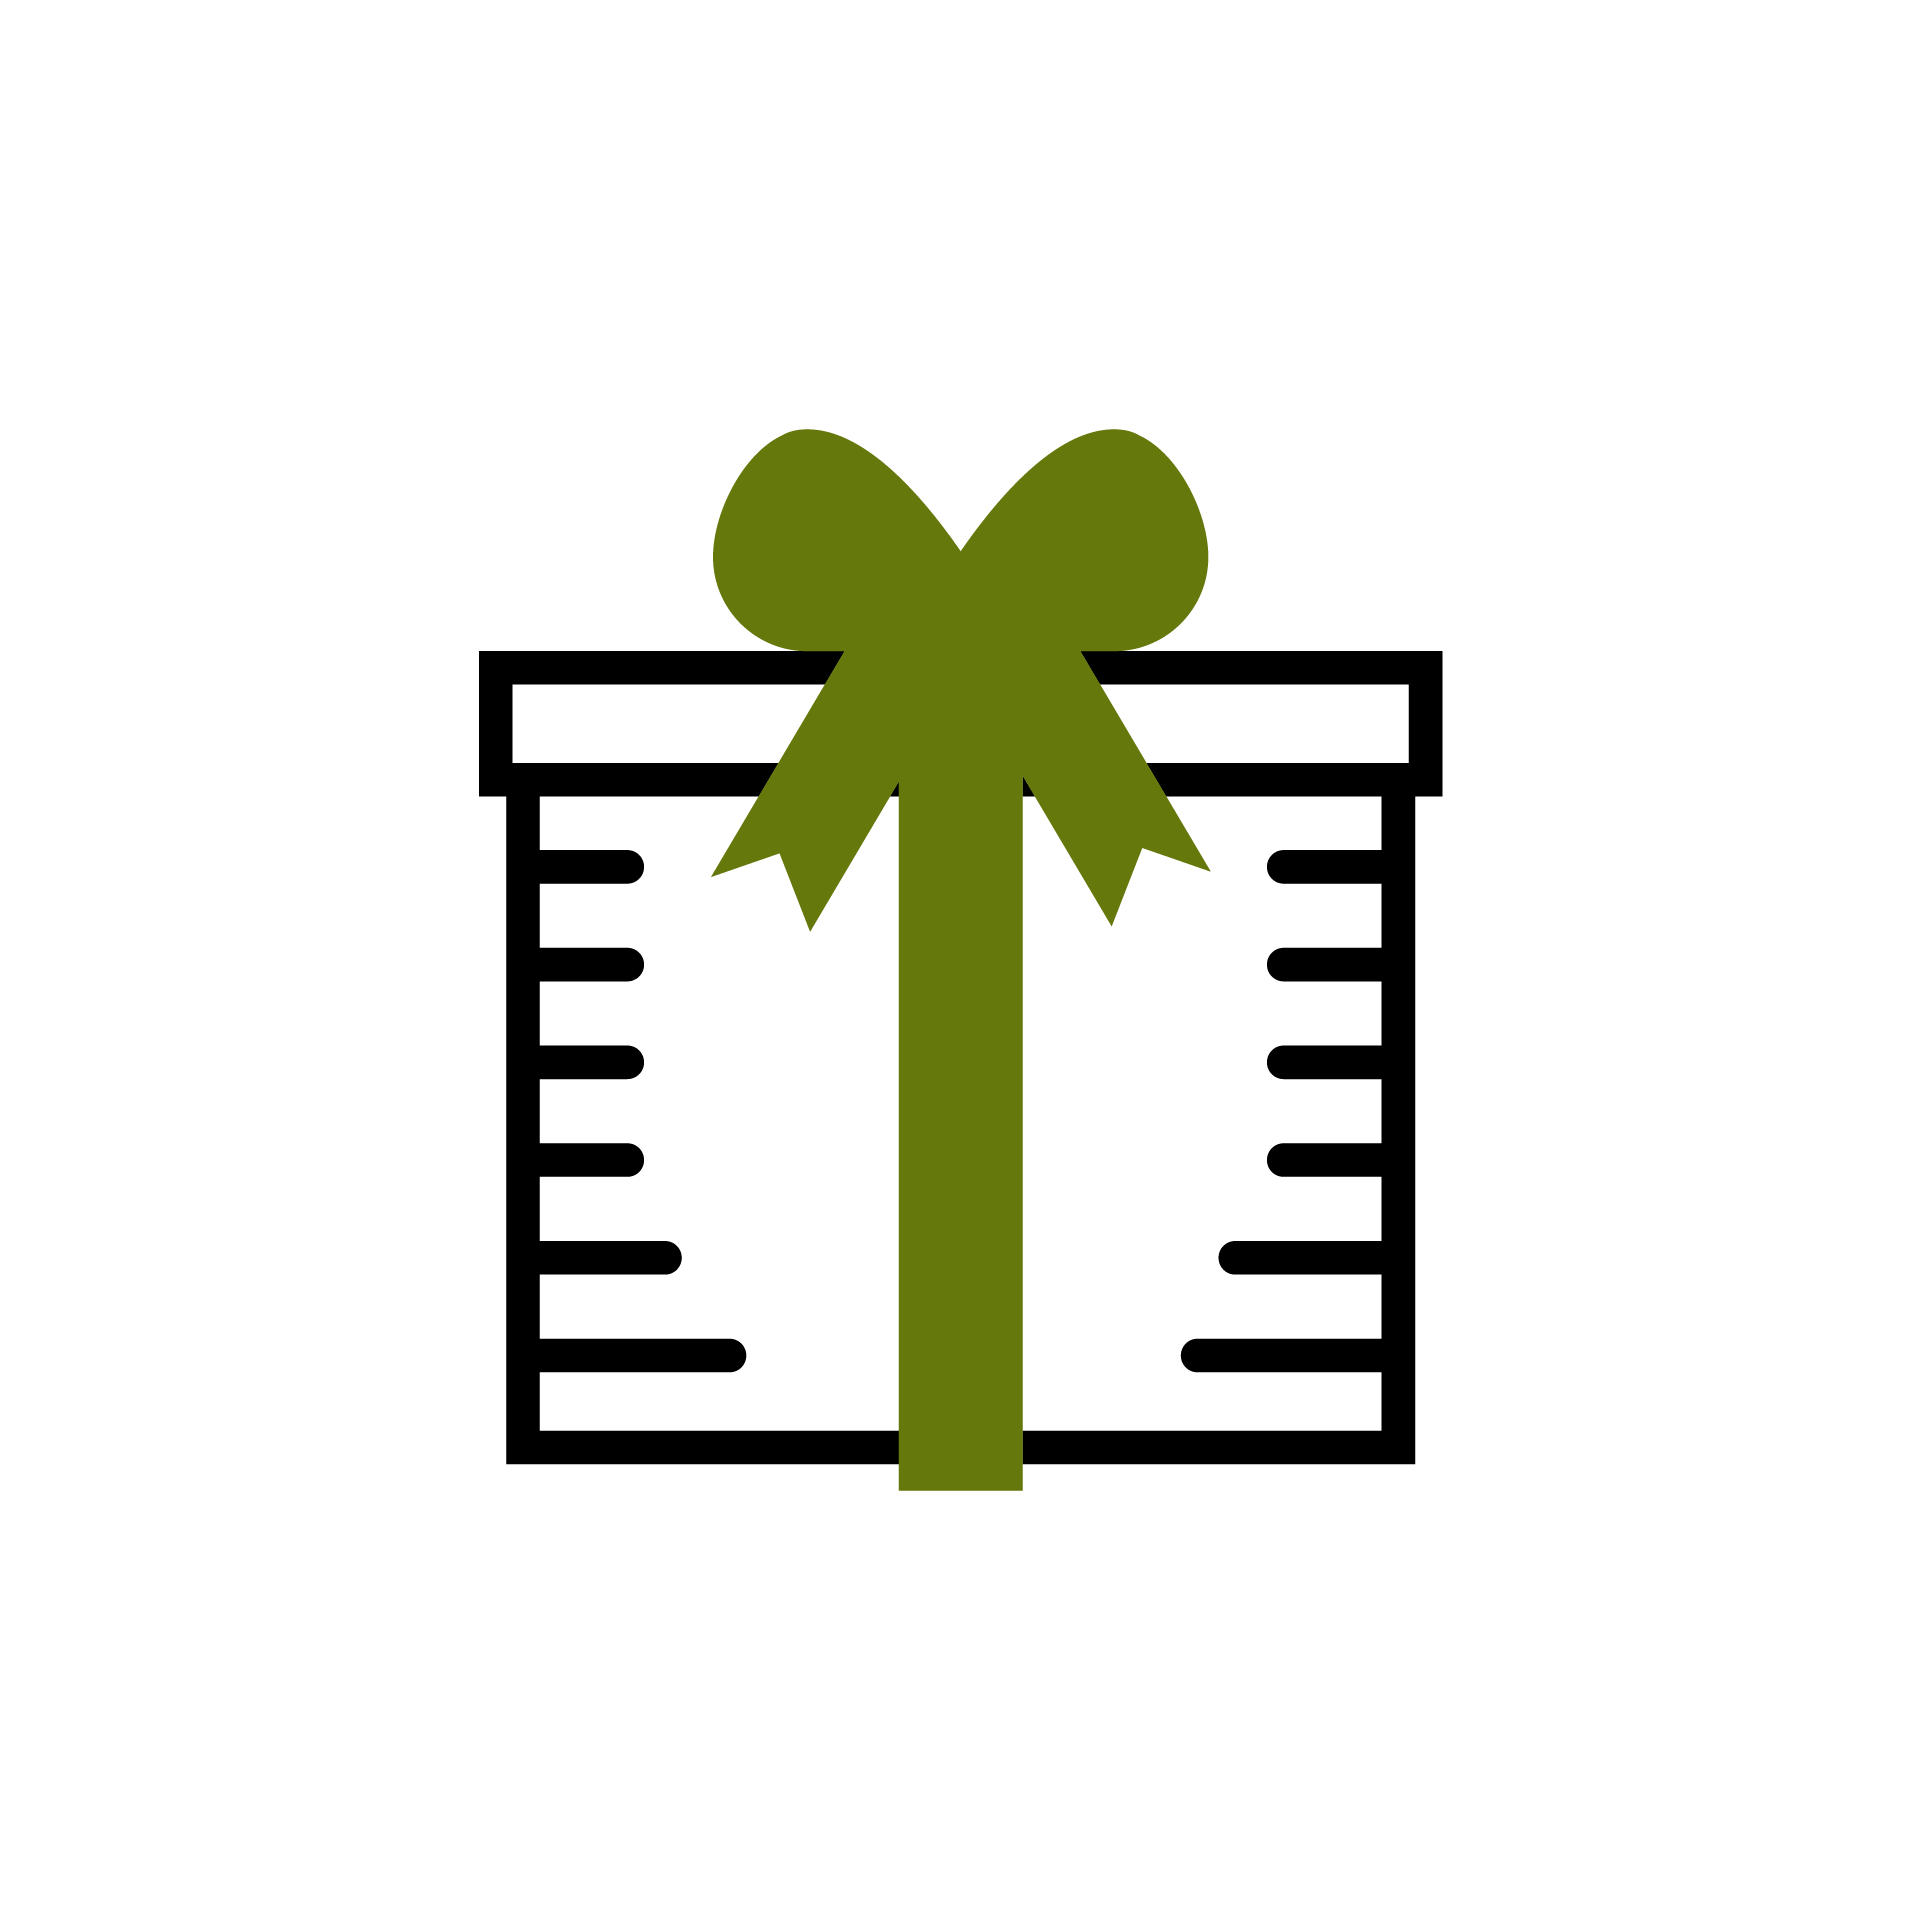 wrapped gift icon